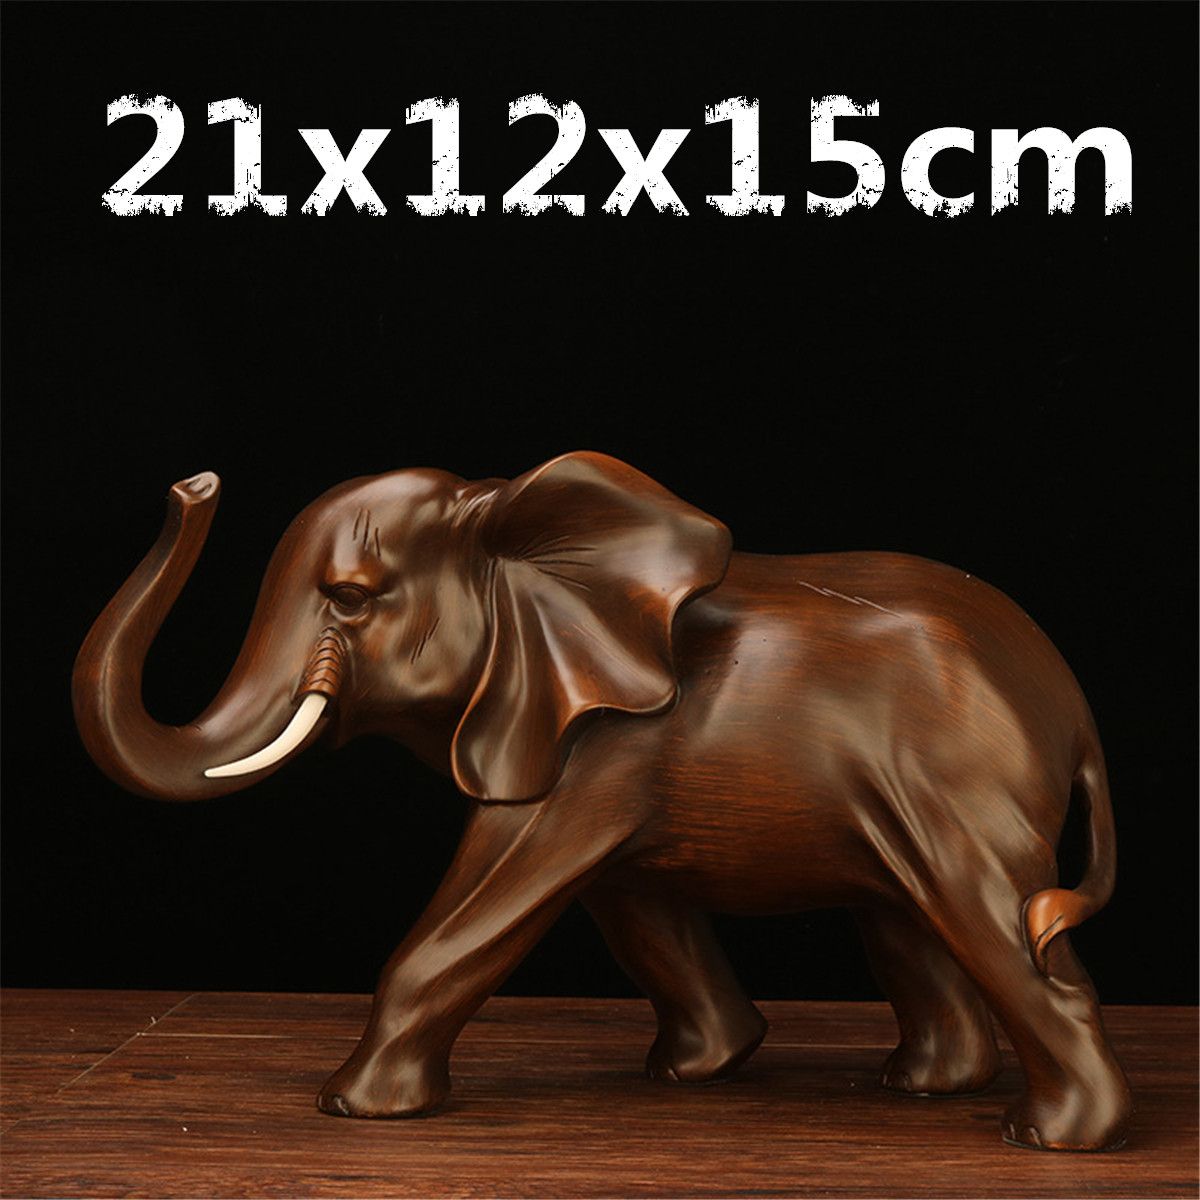 Resin-Elephant-Statue-Fortune-Mascot-Living-Room-Cabinet-TV-Office-Home-Decorations-1545737